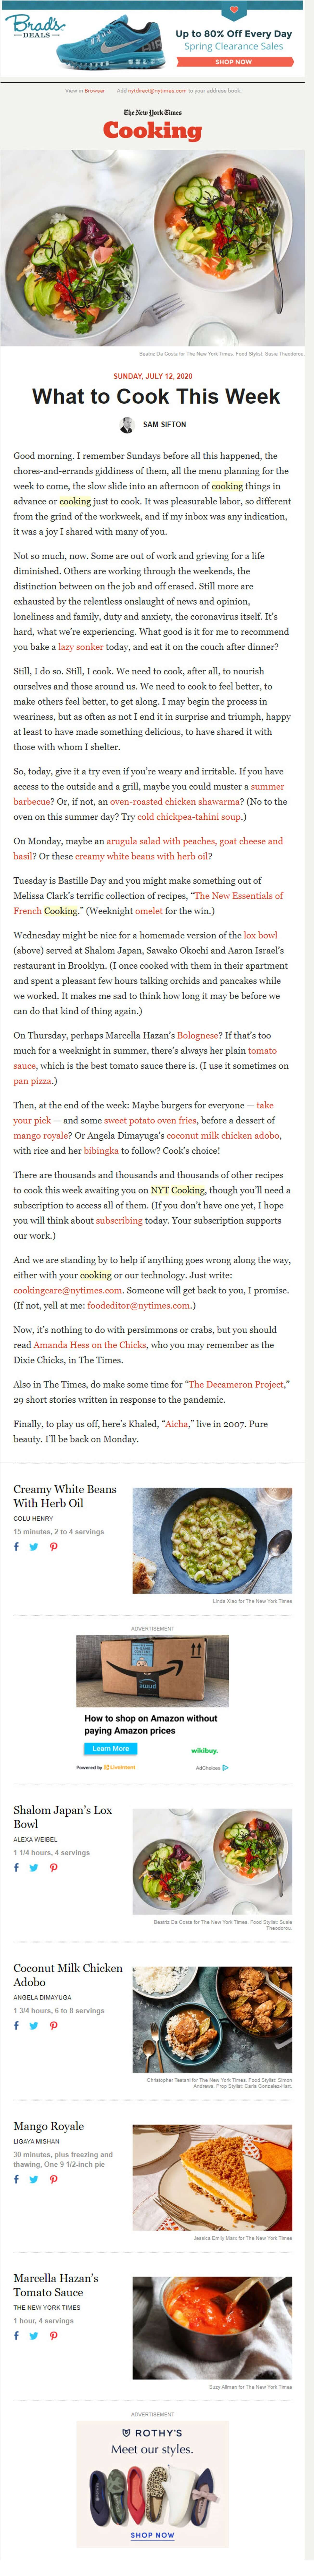 NYT Cooking Offers Multiple Email Ads in Weekly Newsletter